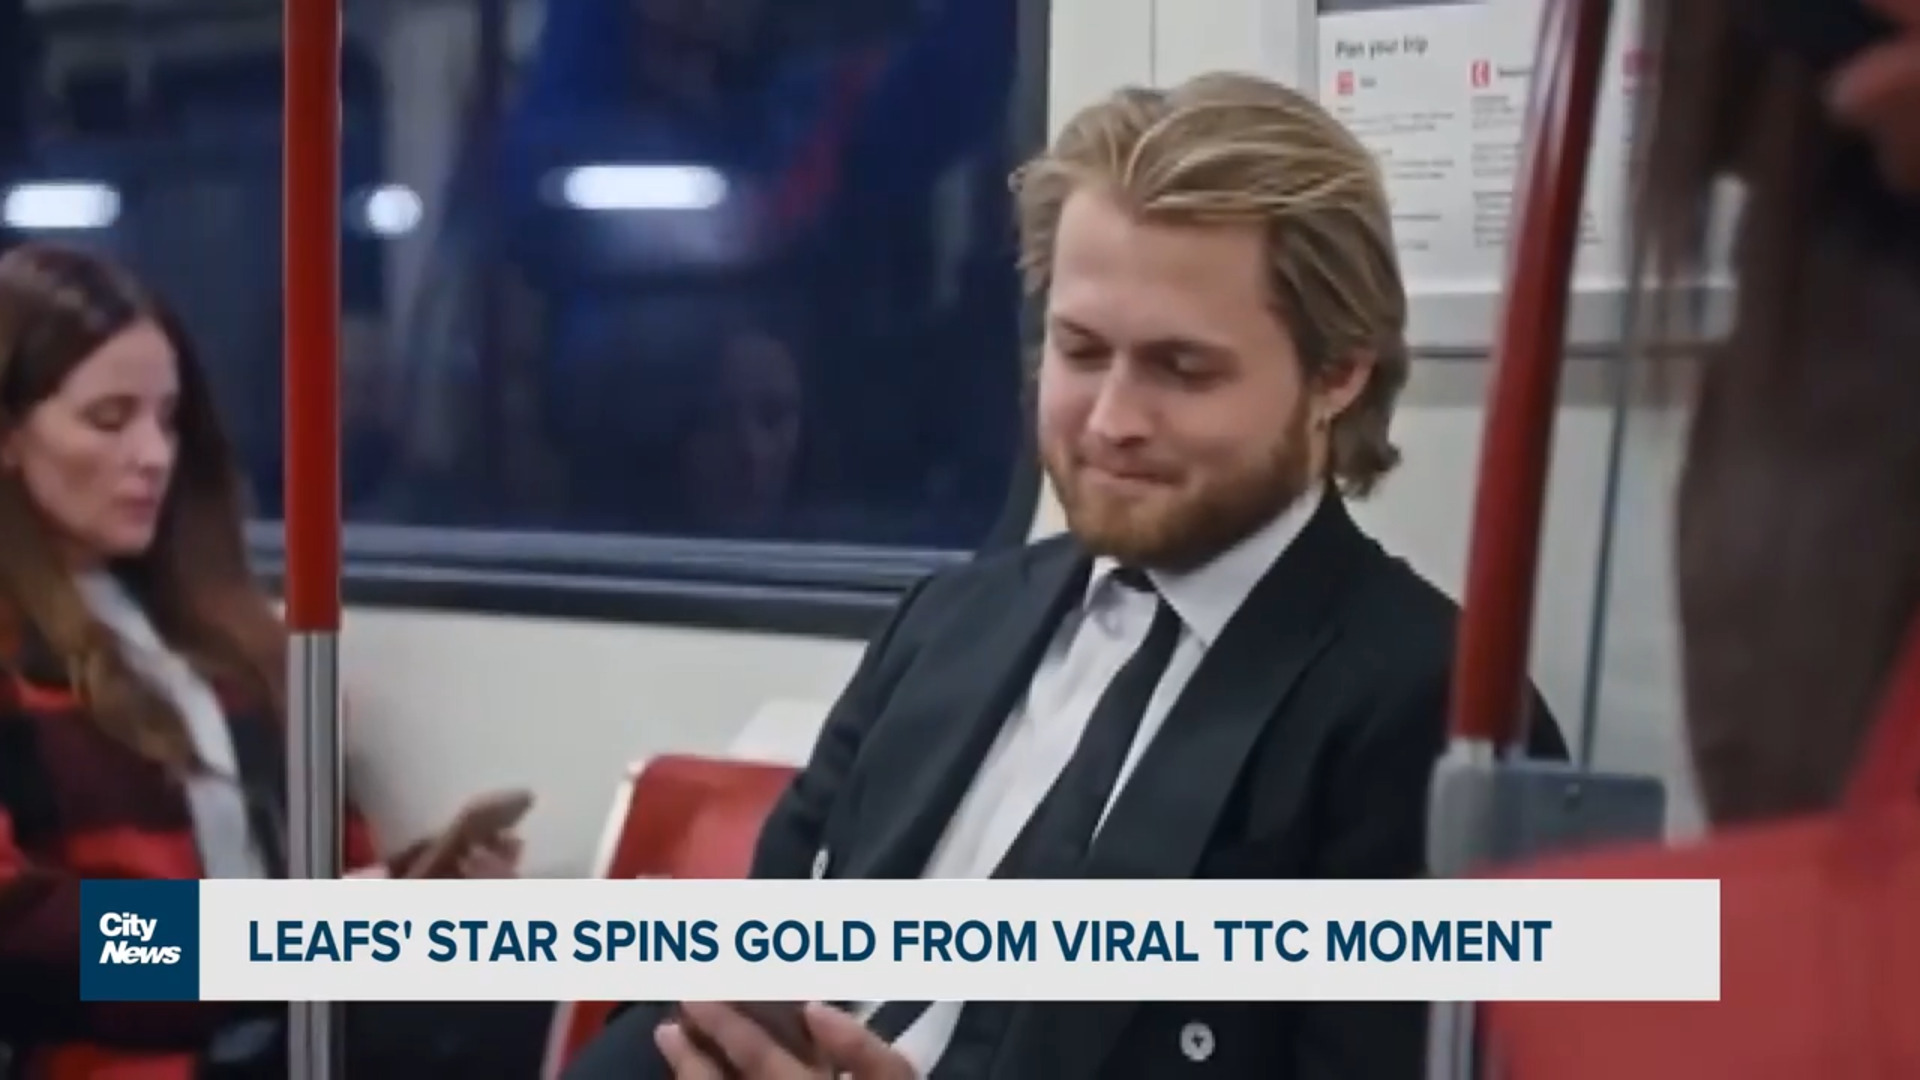 Leafs' star turns viral moment into a positive